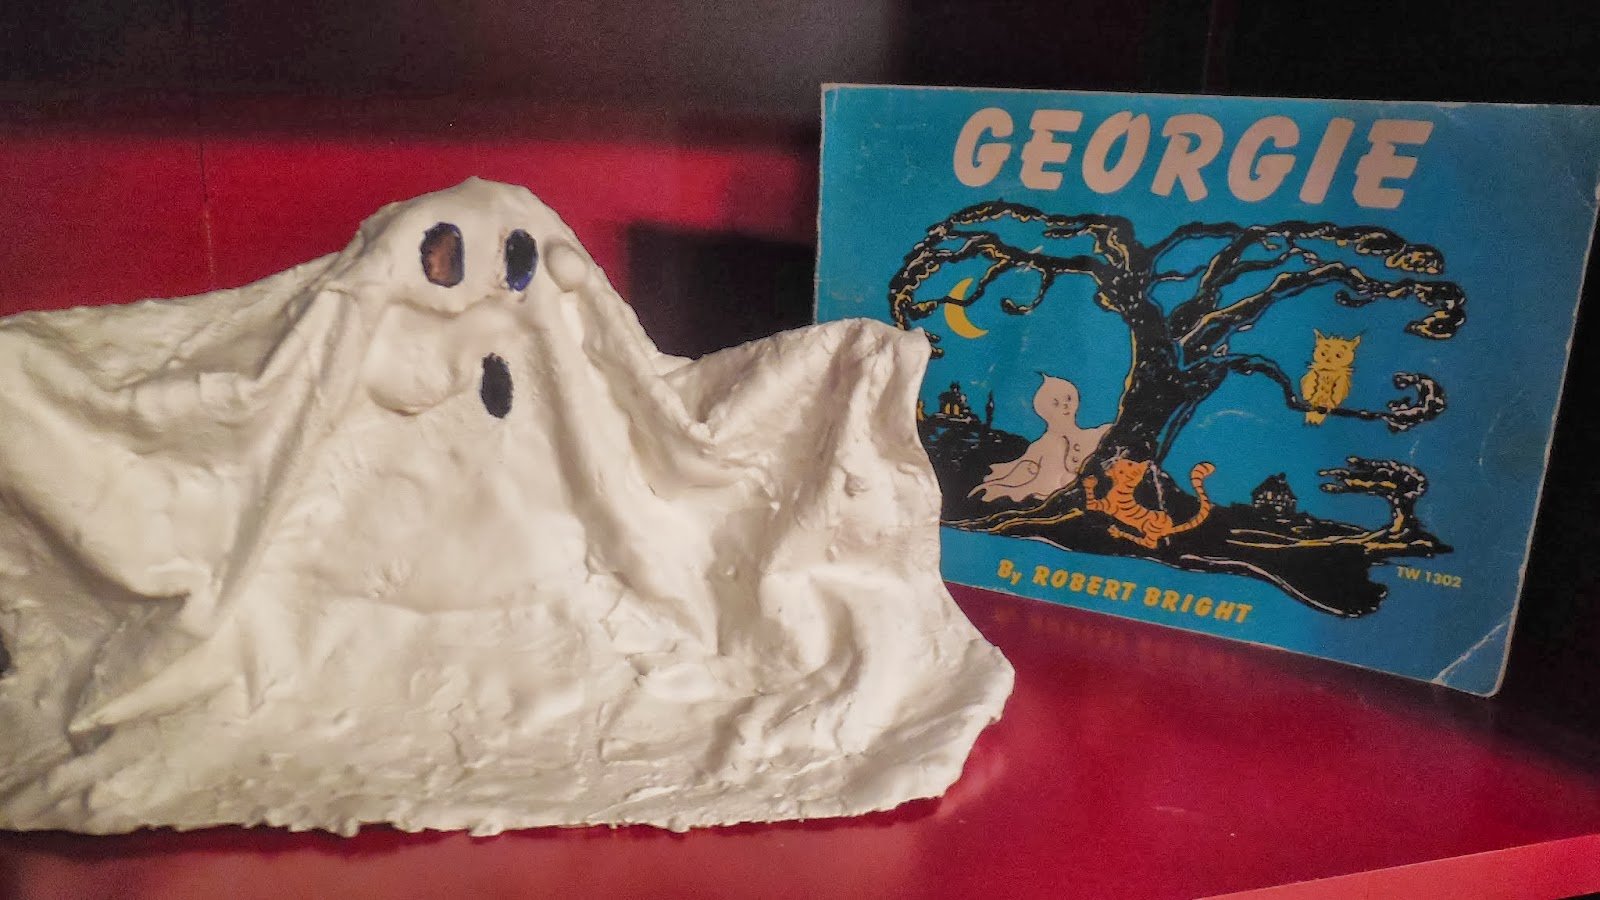 paper mache ghost and georgie the ghost book